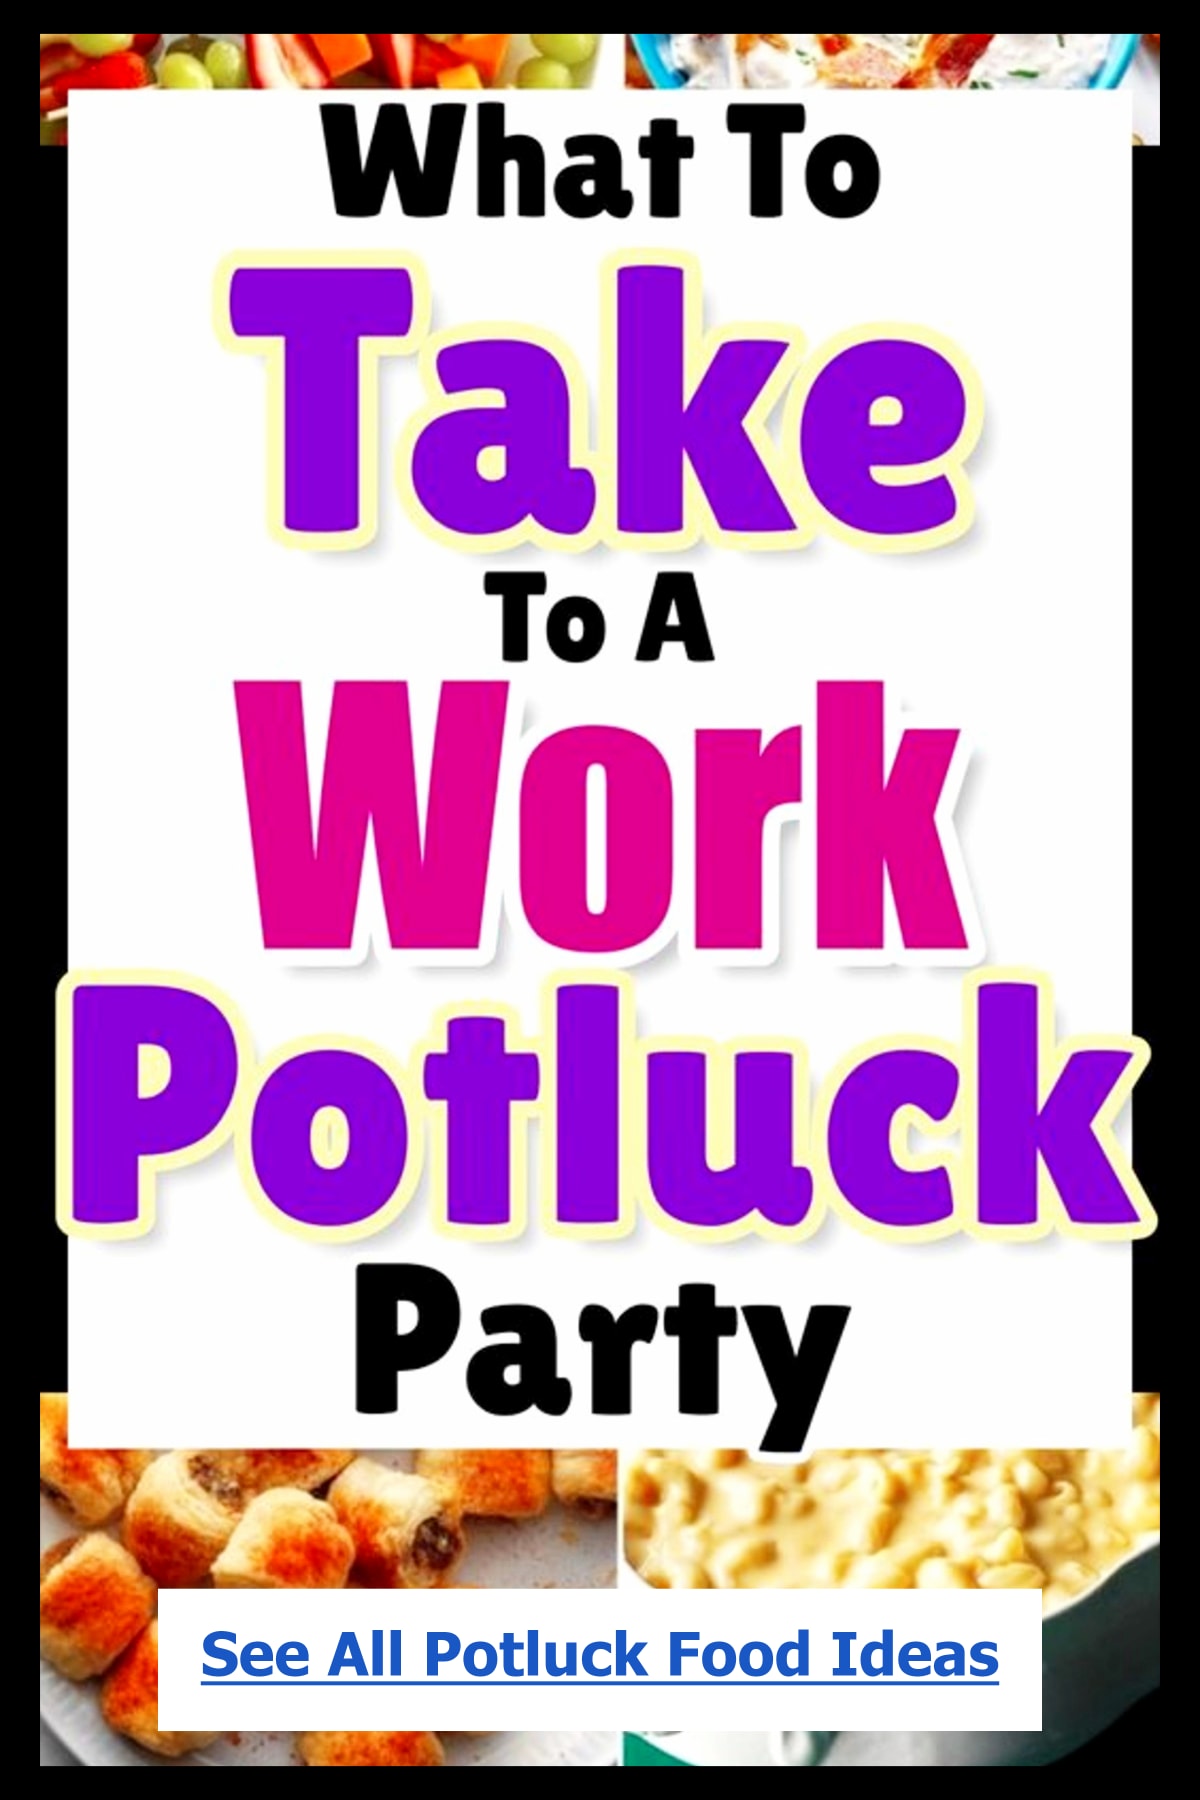 Inexpensive Food Ideas For a Potluck